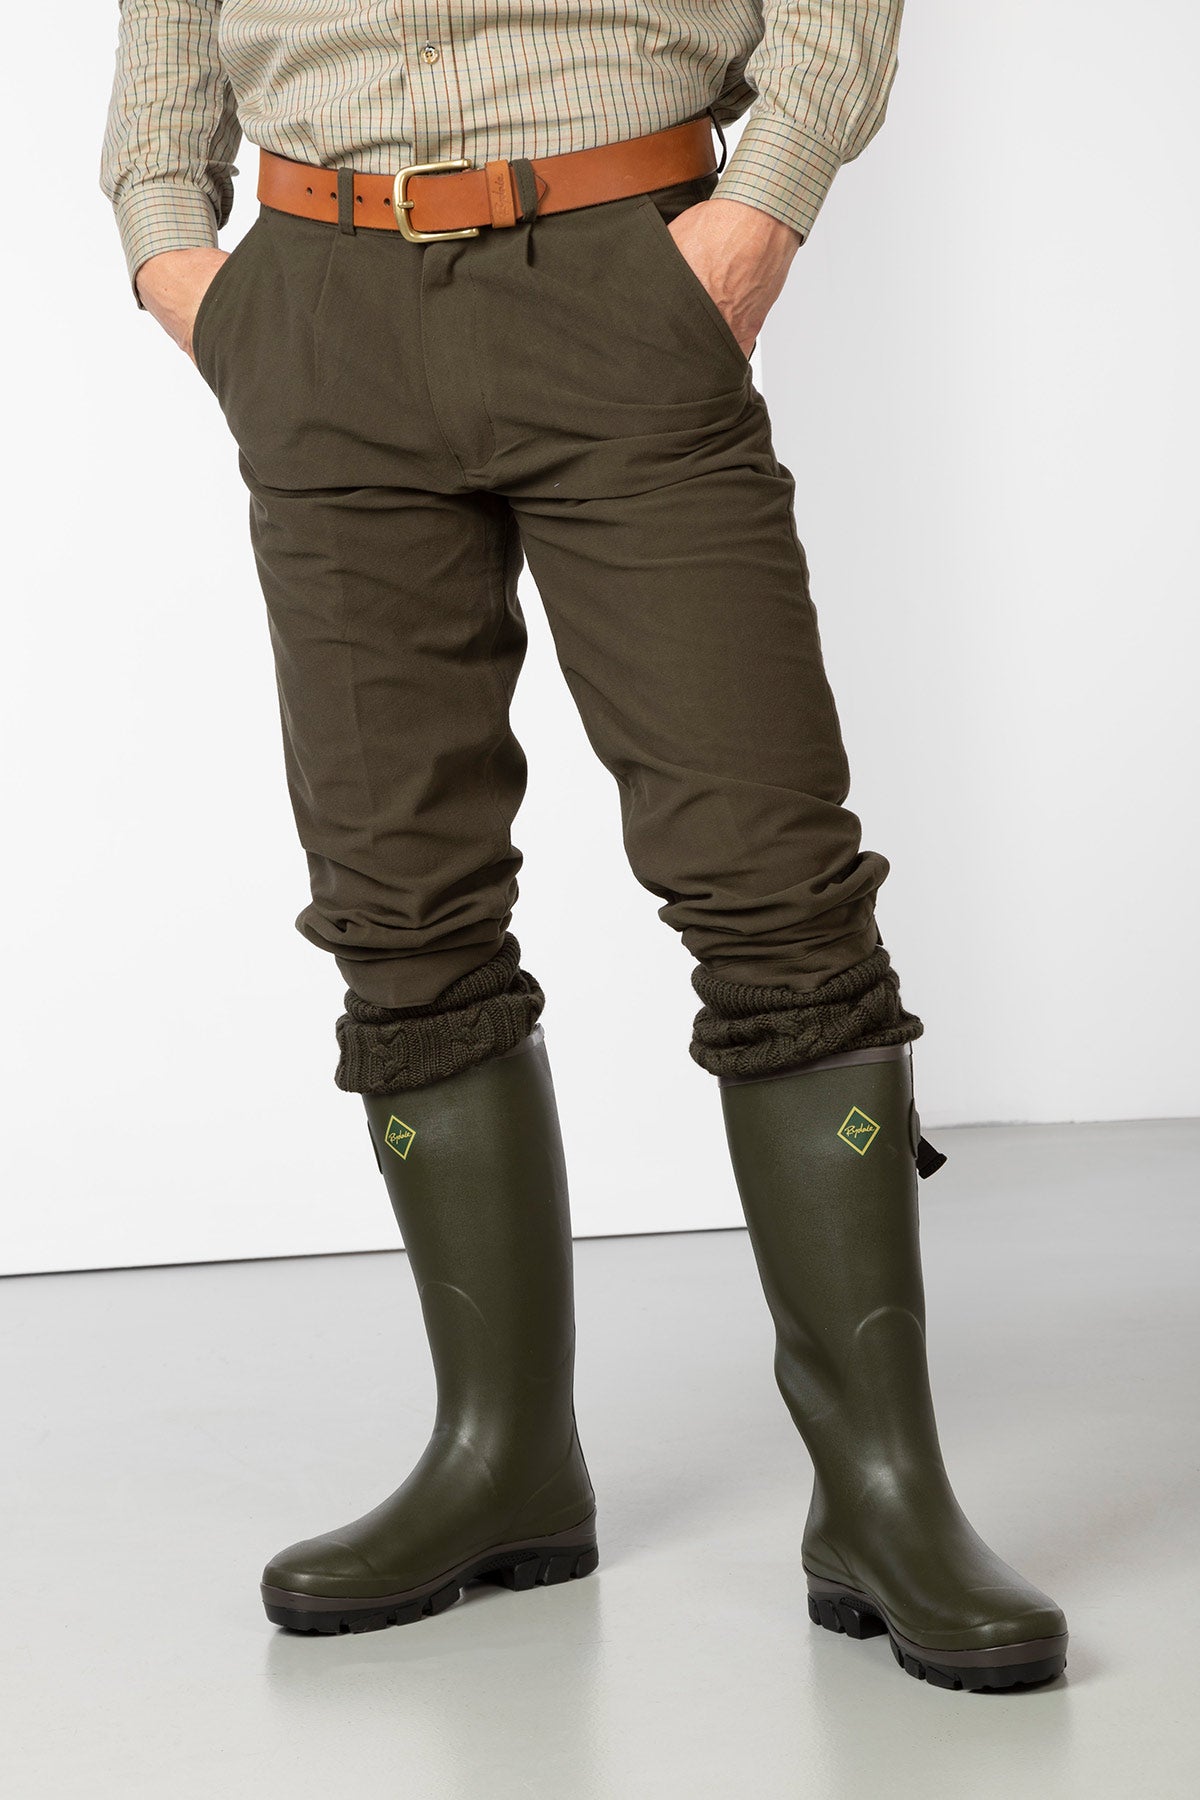 Mens Shooting Trousers  Breeks  Page 4  William Powell